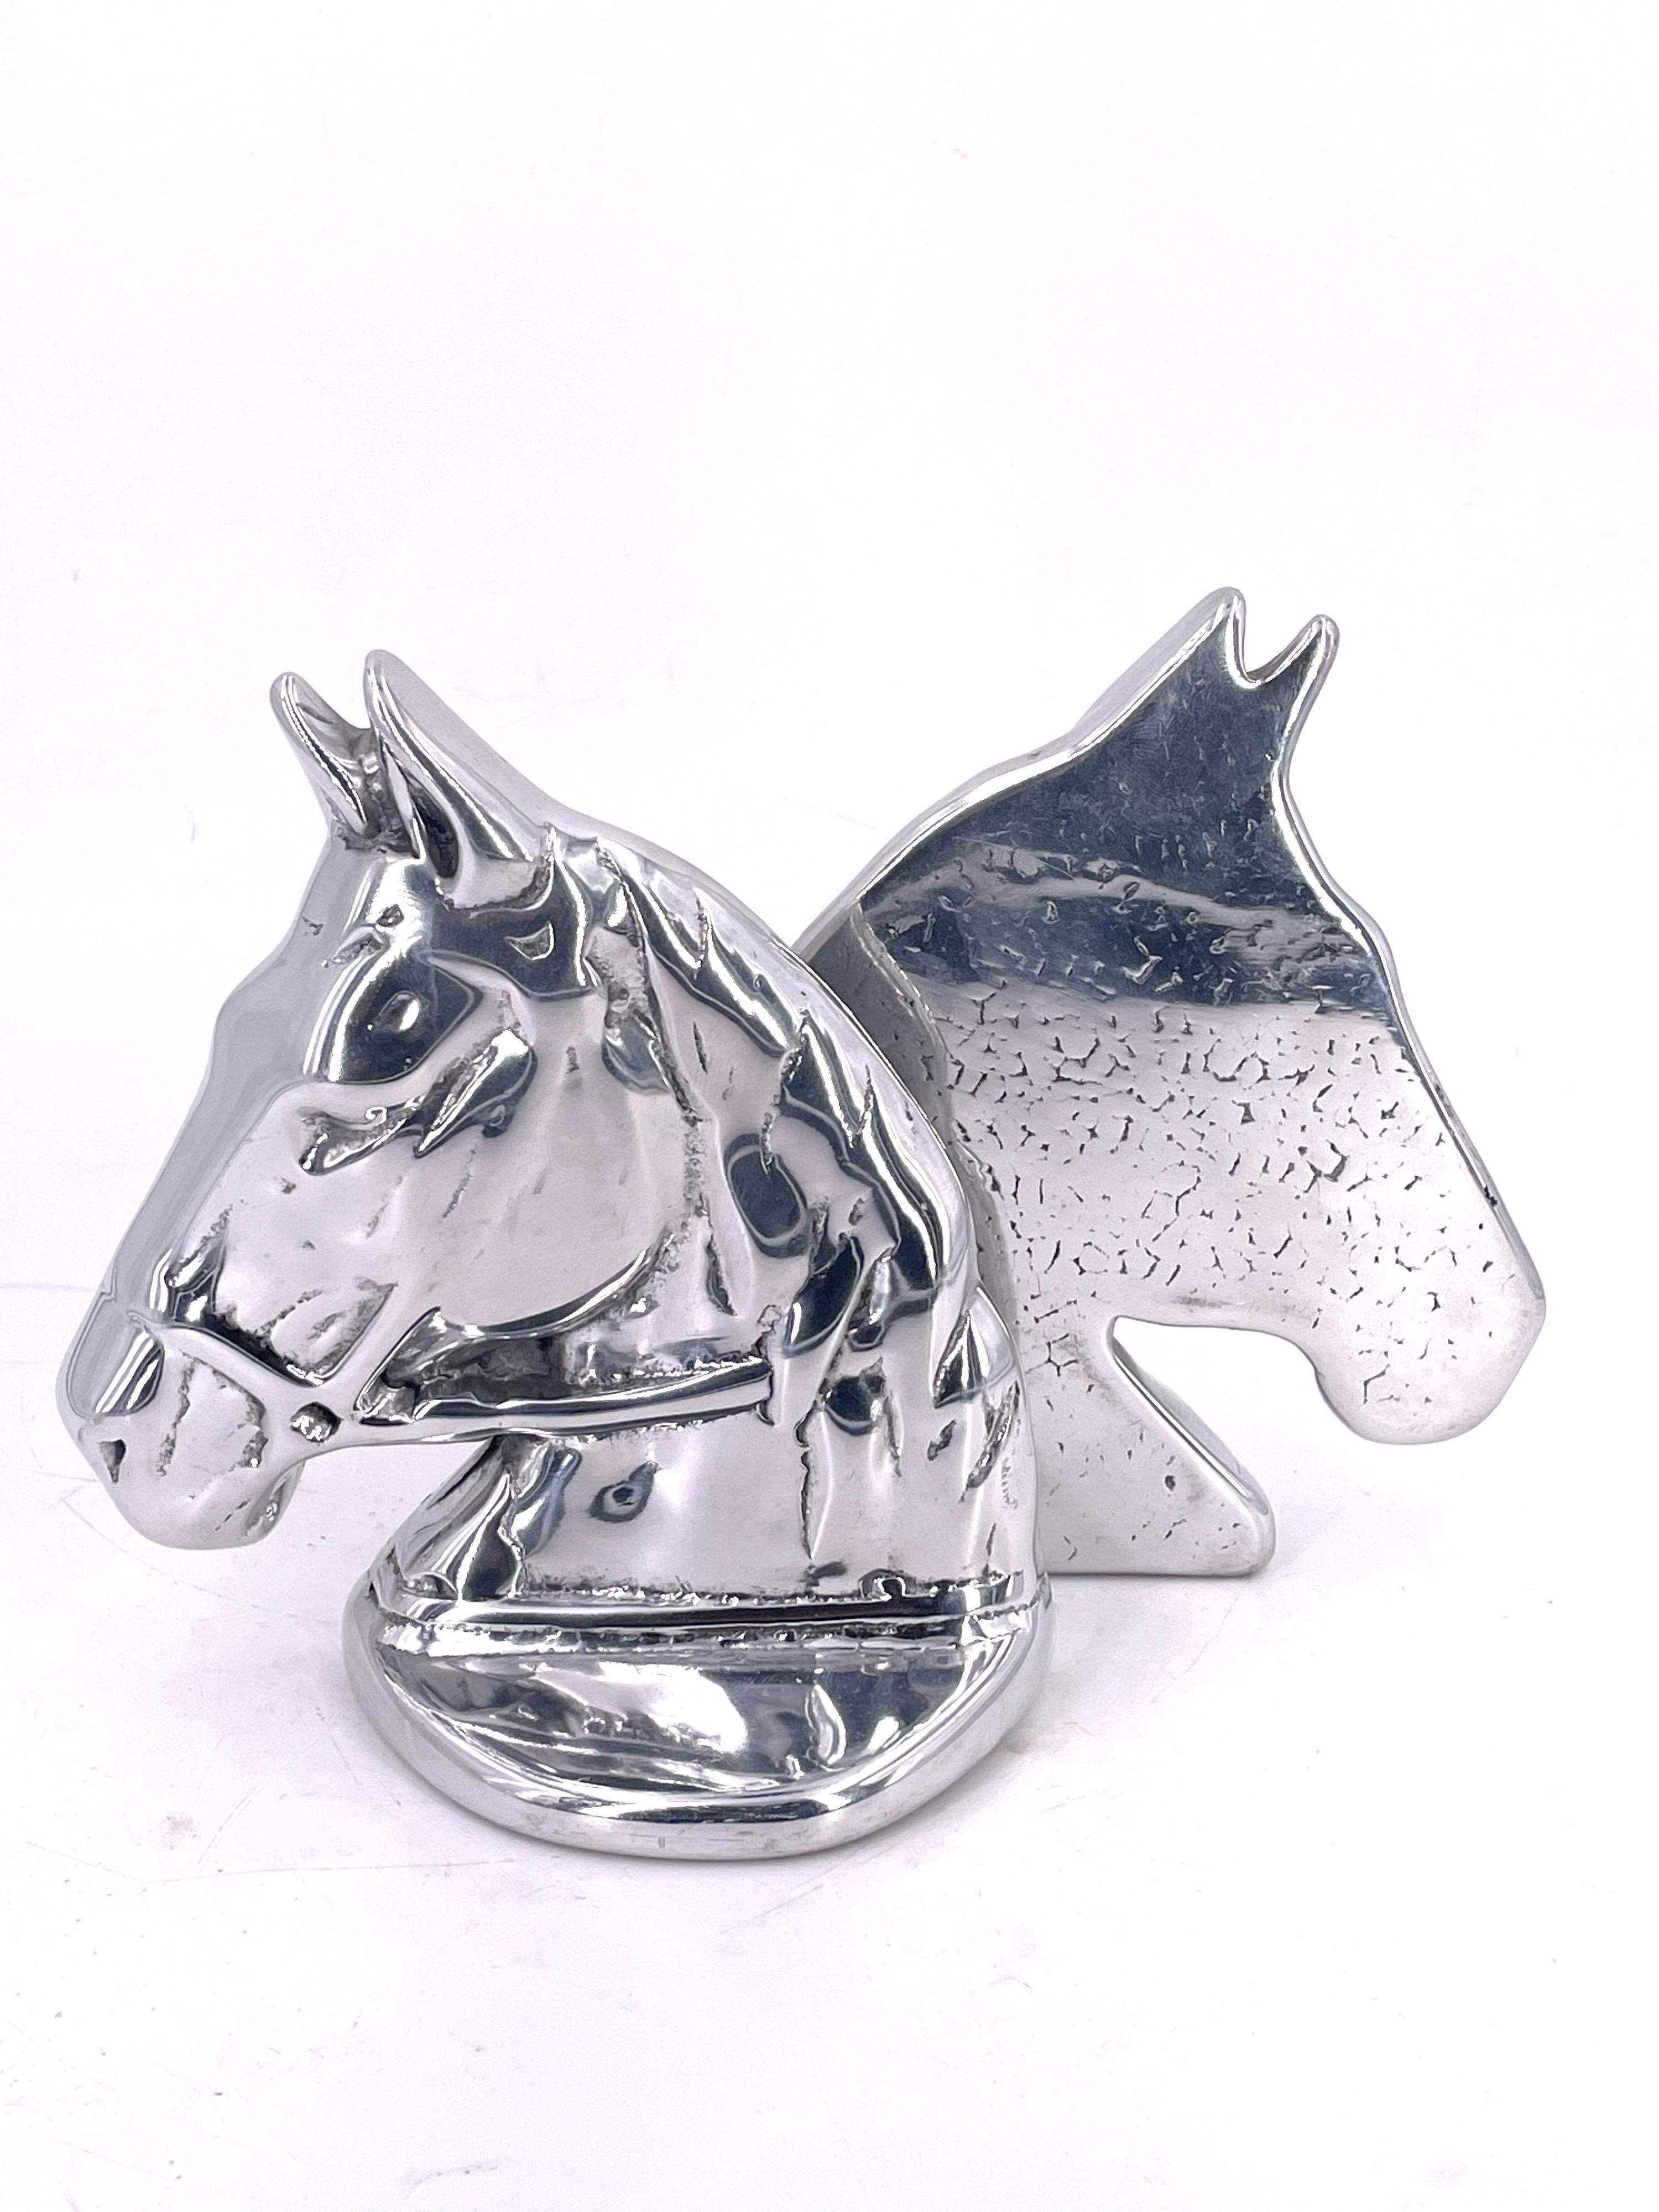 Polished aluminum rare horse sculpture by Hosleton signed, and numbered made in Canada circa 1970s.